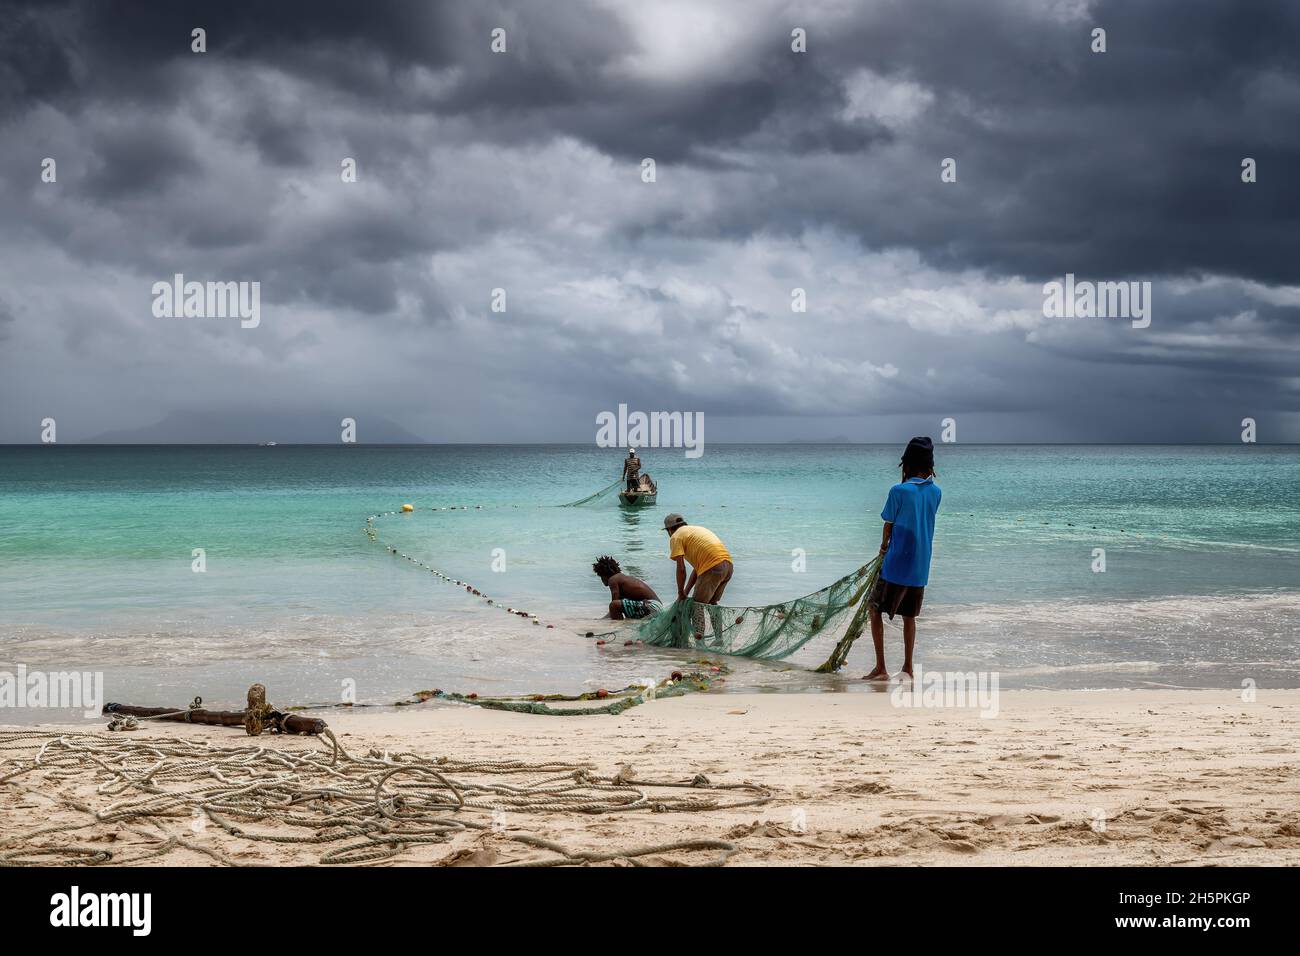 Fishermen pull nets from the sea on a beach in the tropics with dramatic sky on Mahe Island, Seychelles Stock Photo